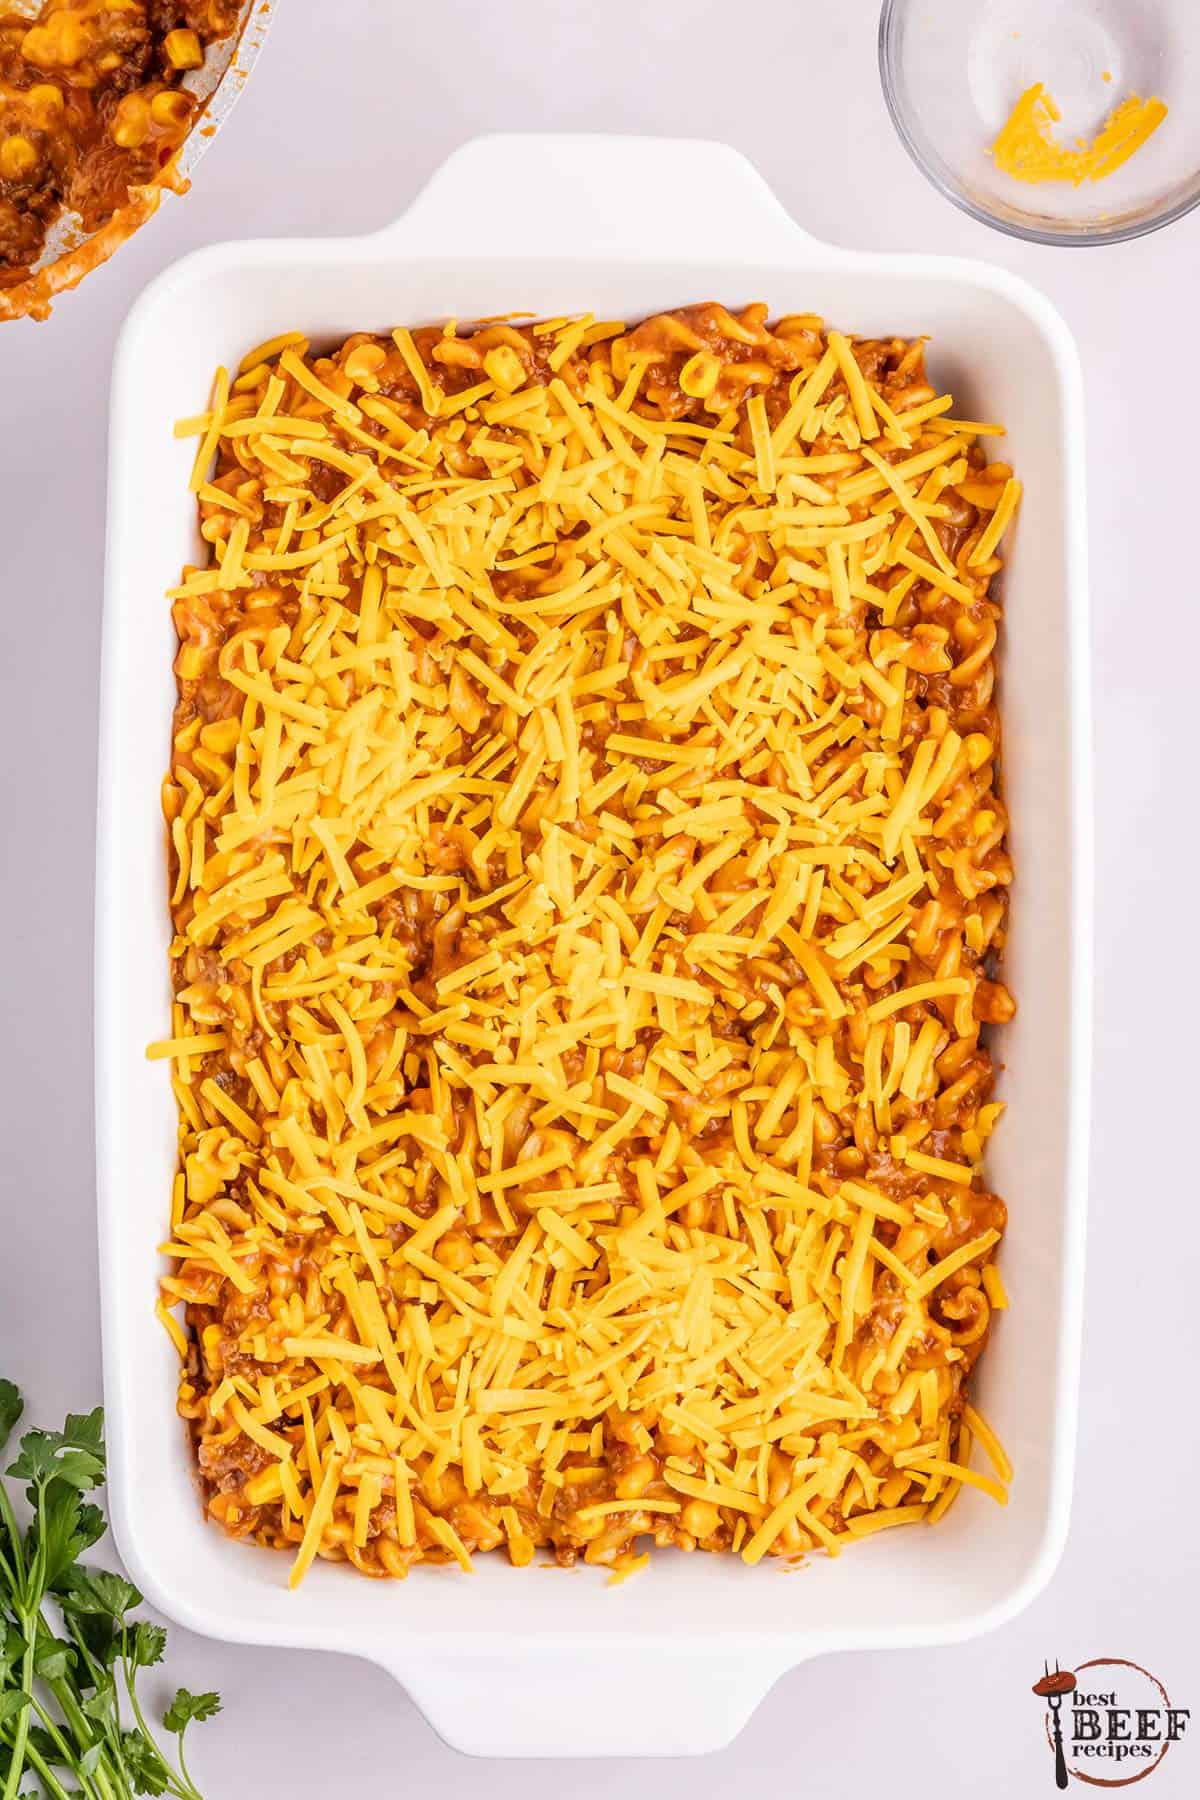 the mixed casserole poured in a dish and topped with cheddar cheese